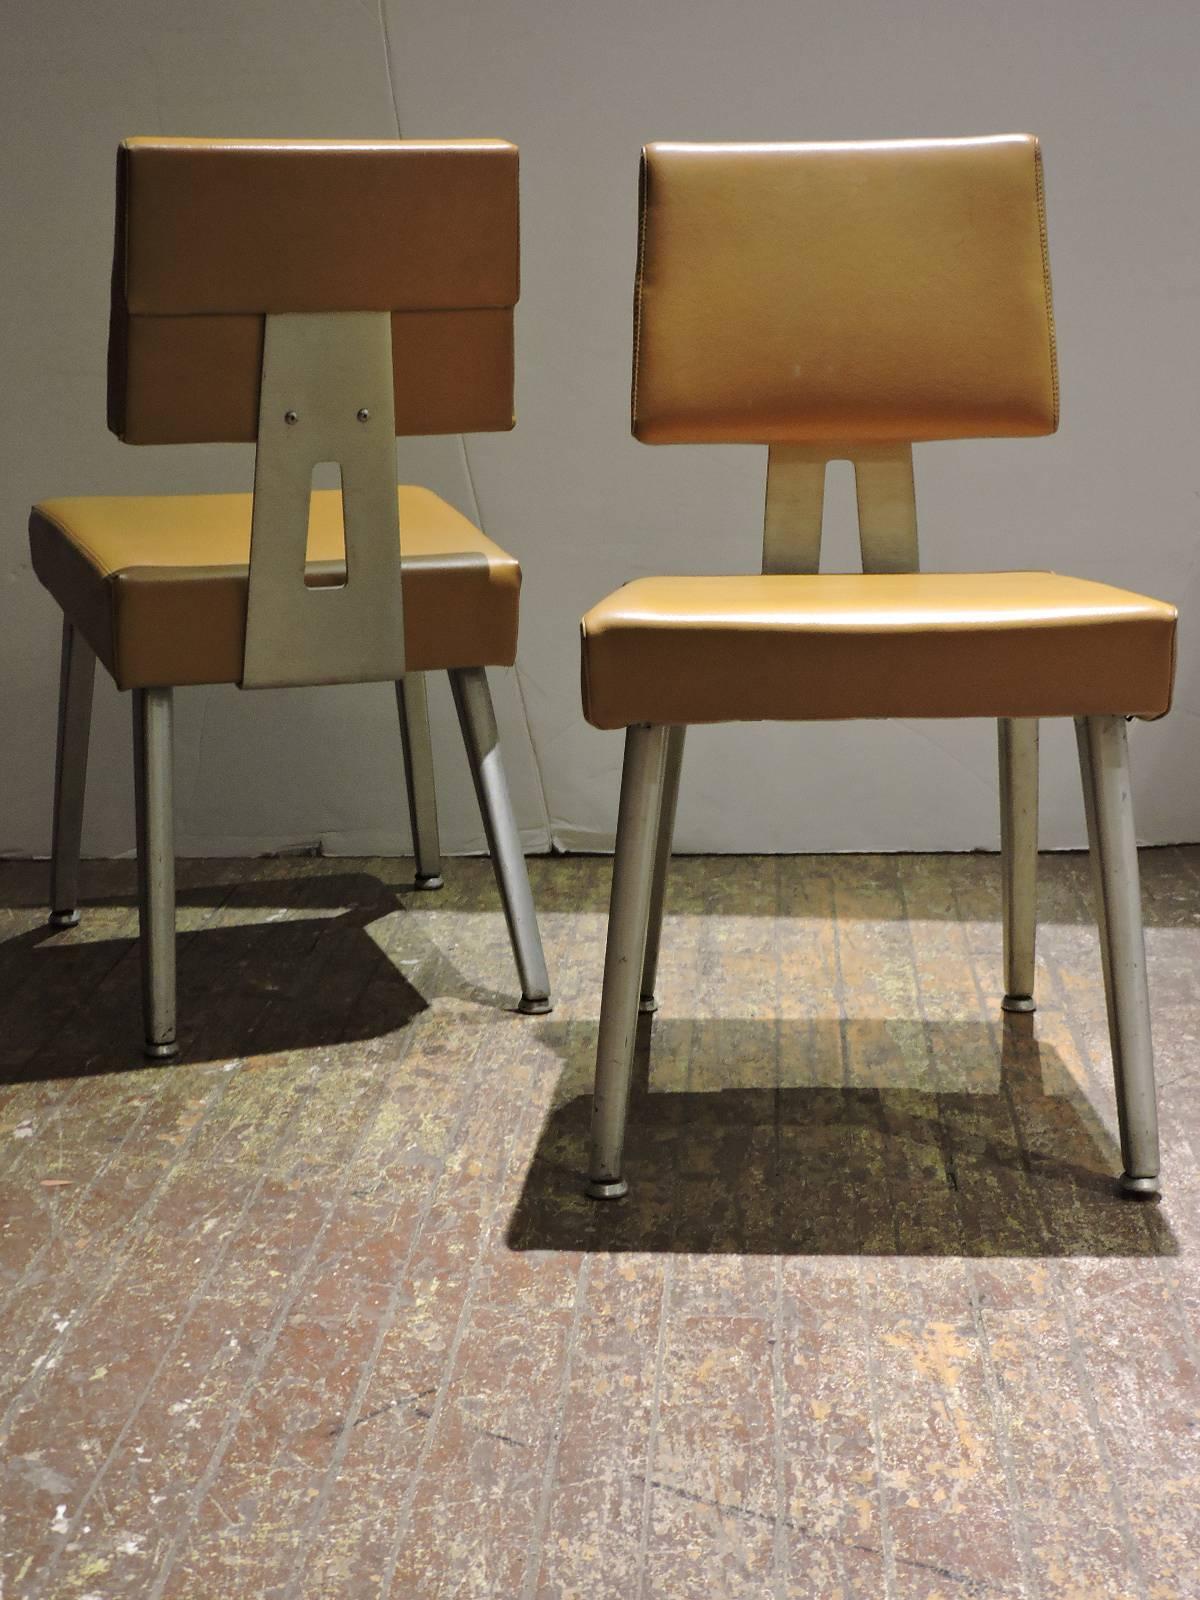 American Industrial Task Chairs by GoodForm